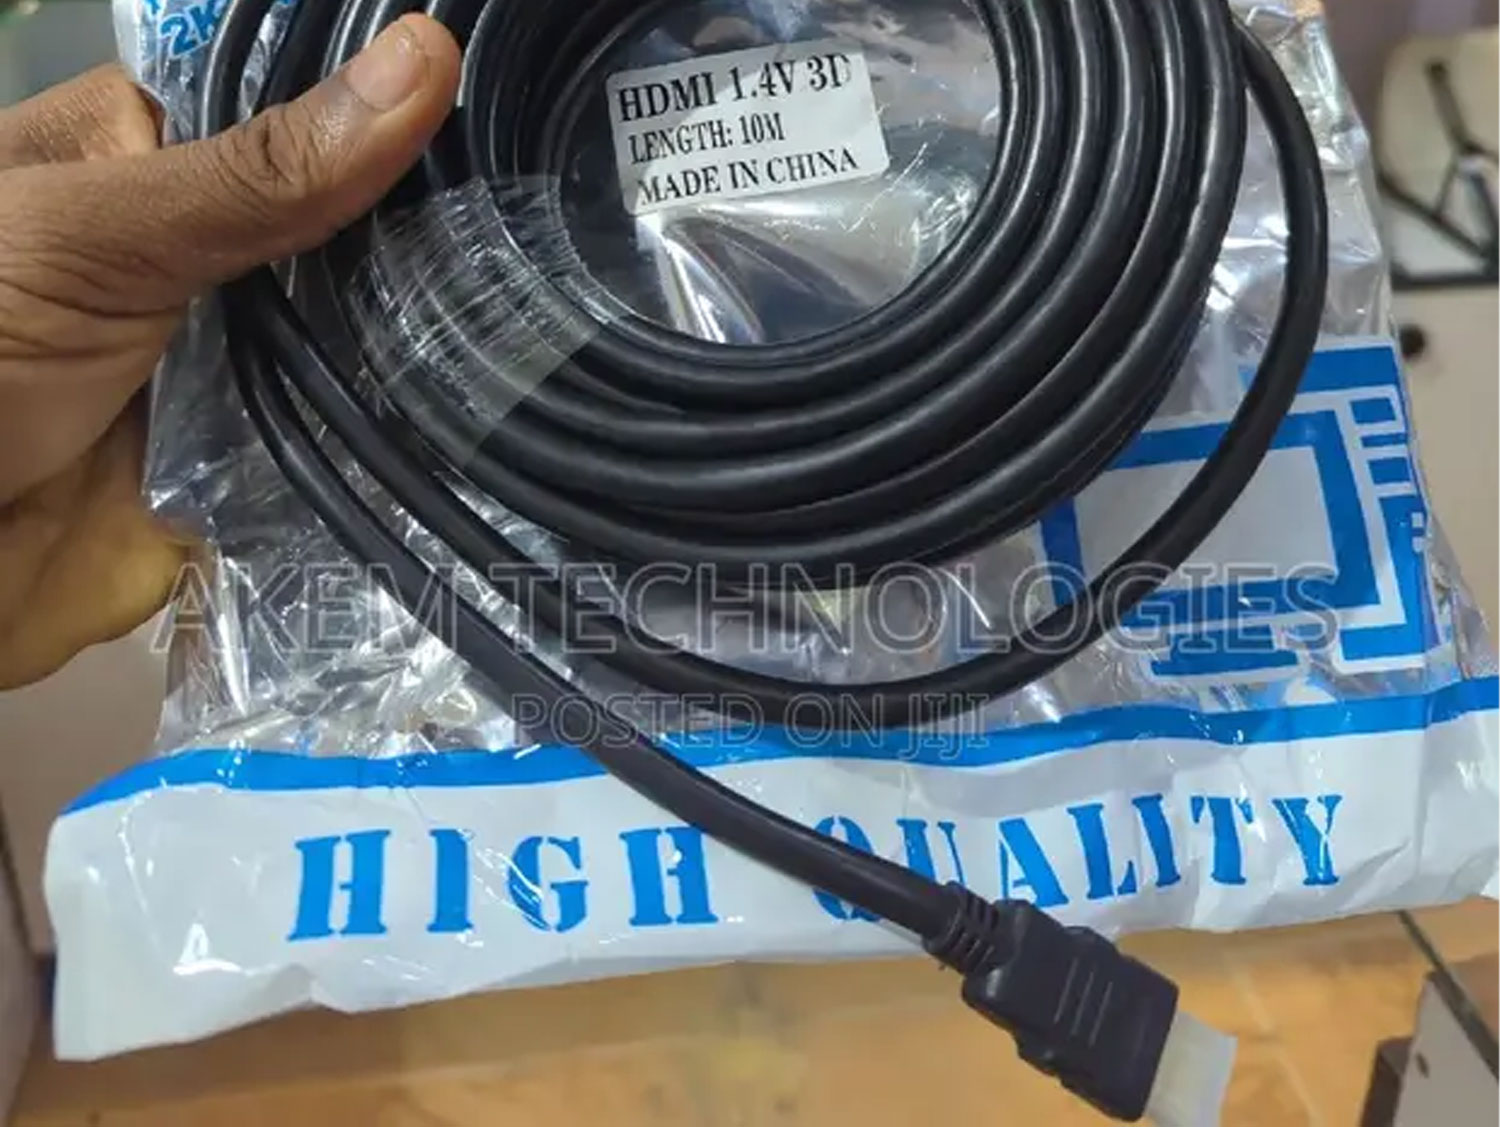 High-Speed 1.4v HDMI Cable 10 Meter in Use at an Event